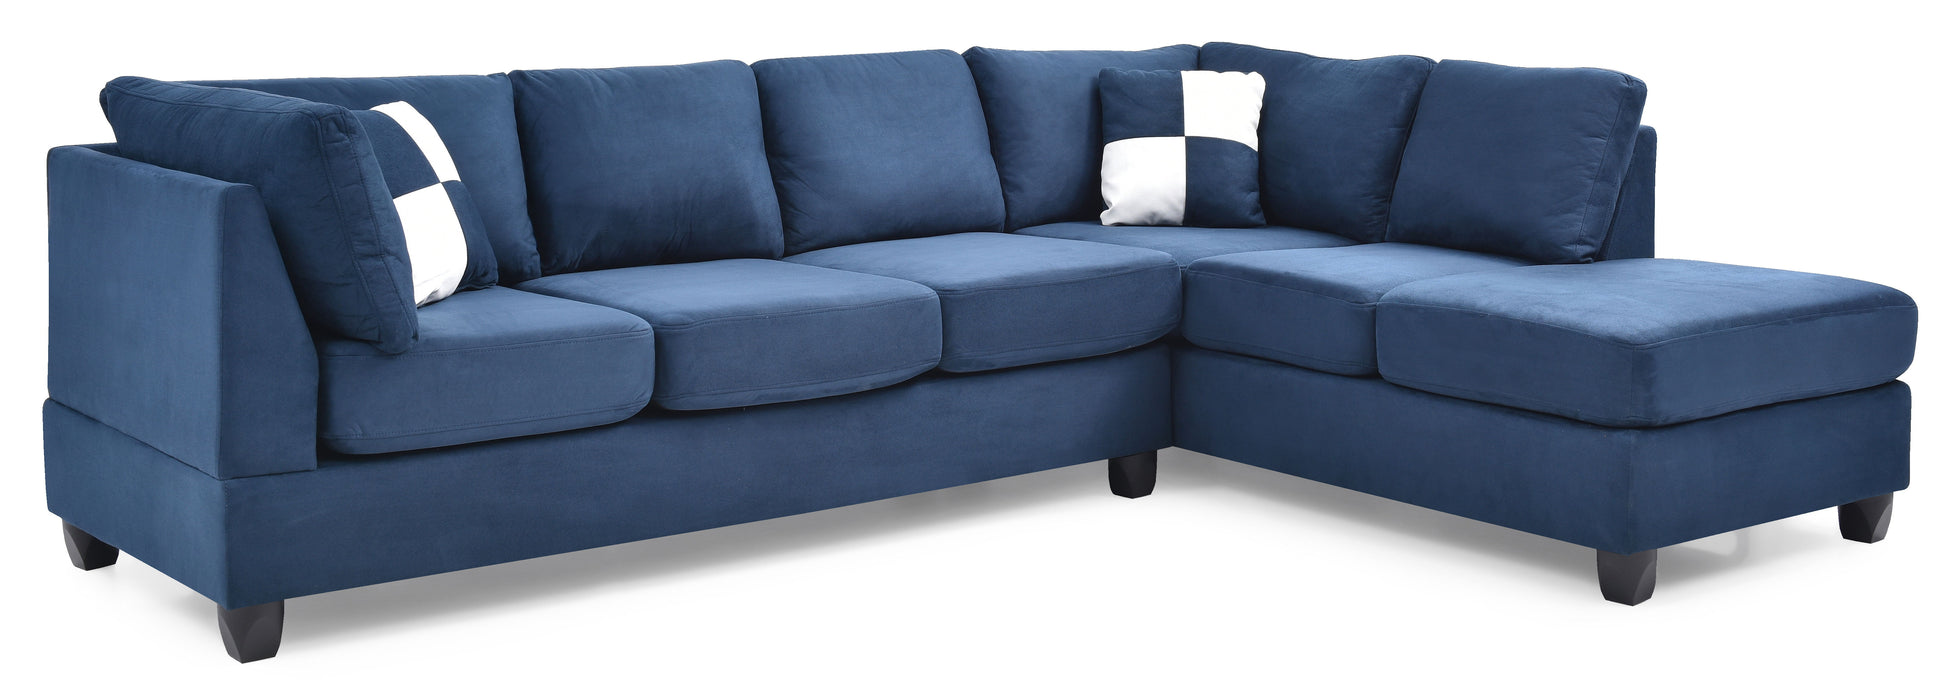 Malone - G630B-SC Sectional (3 Boxes) - Navy Blue